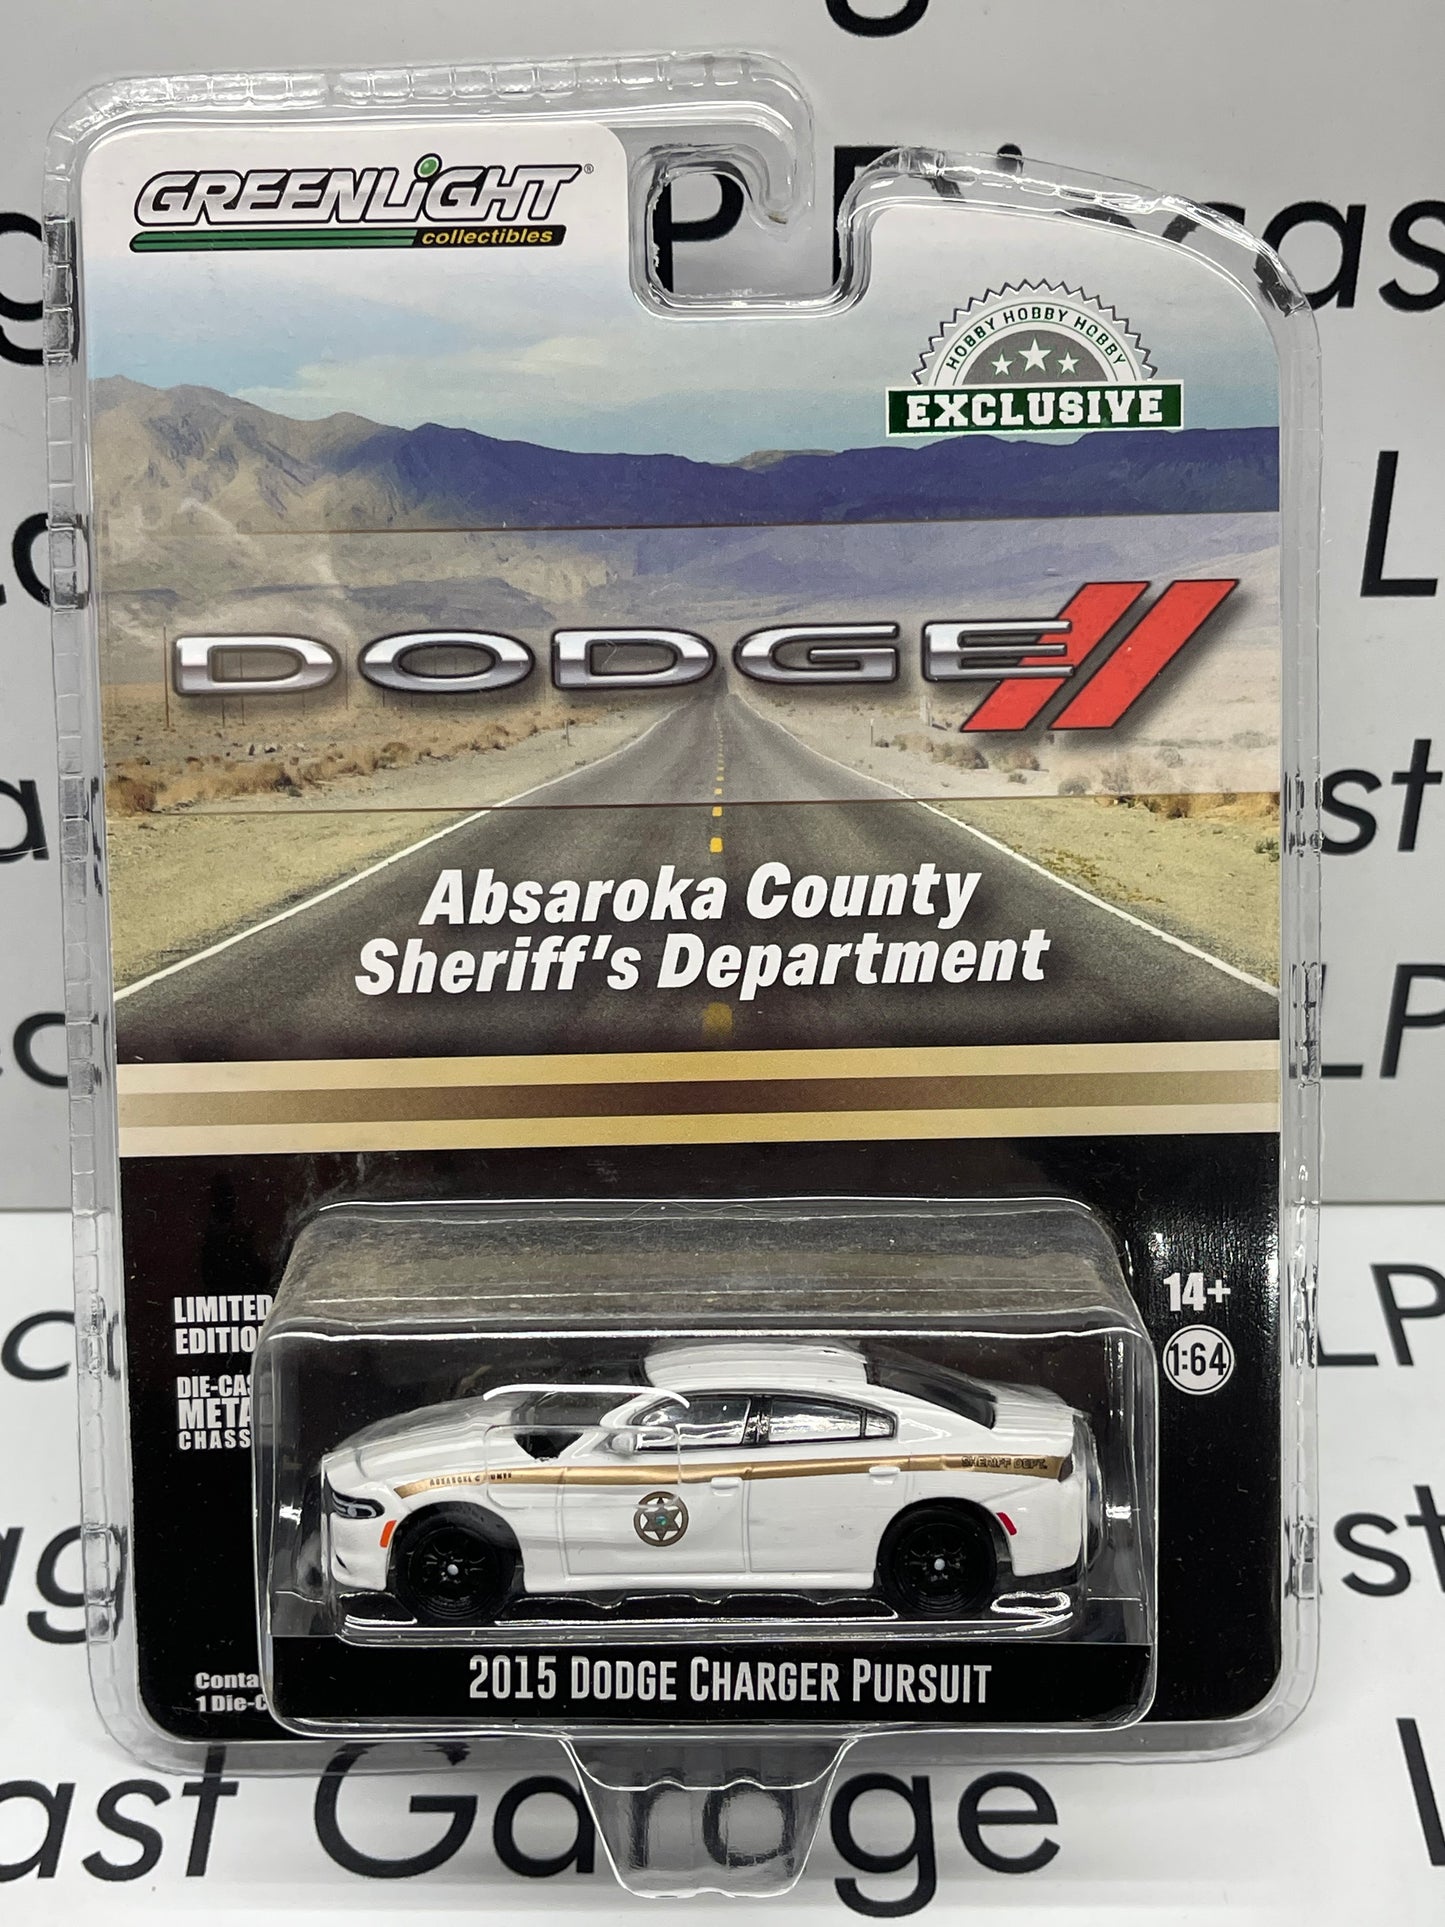 GREENLIGHT 2015 Dodge Charger Pursuit Absaroka County Sheriff Police Car 1:64 Diecast